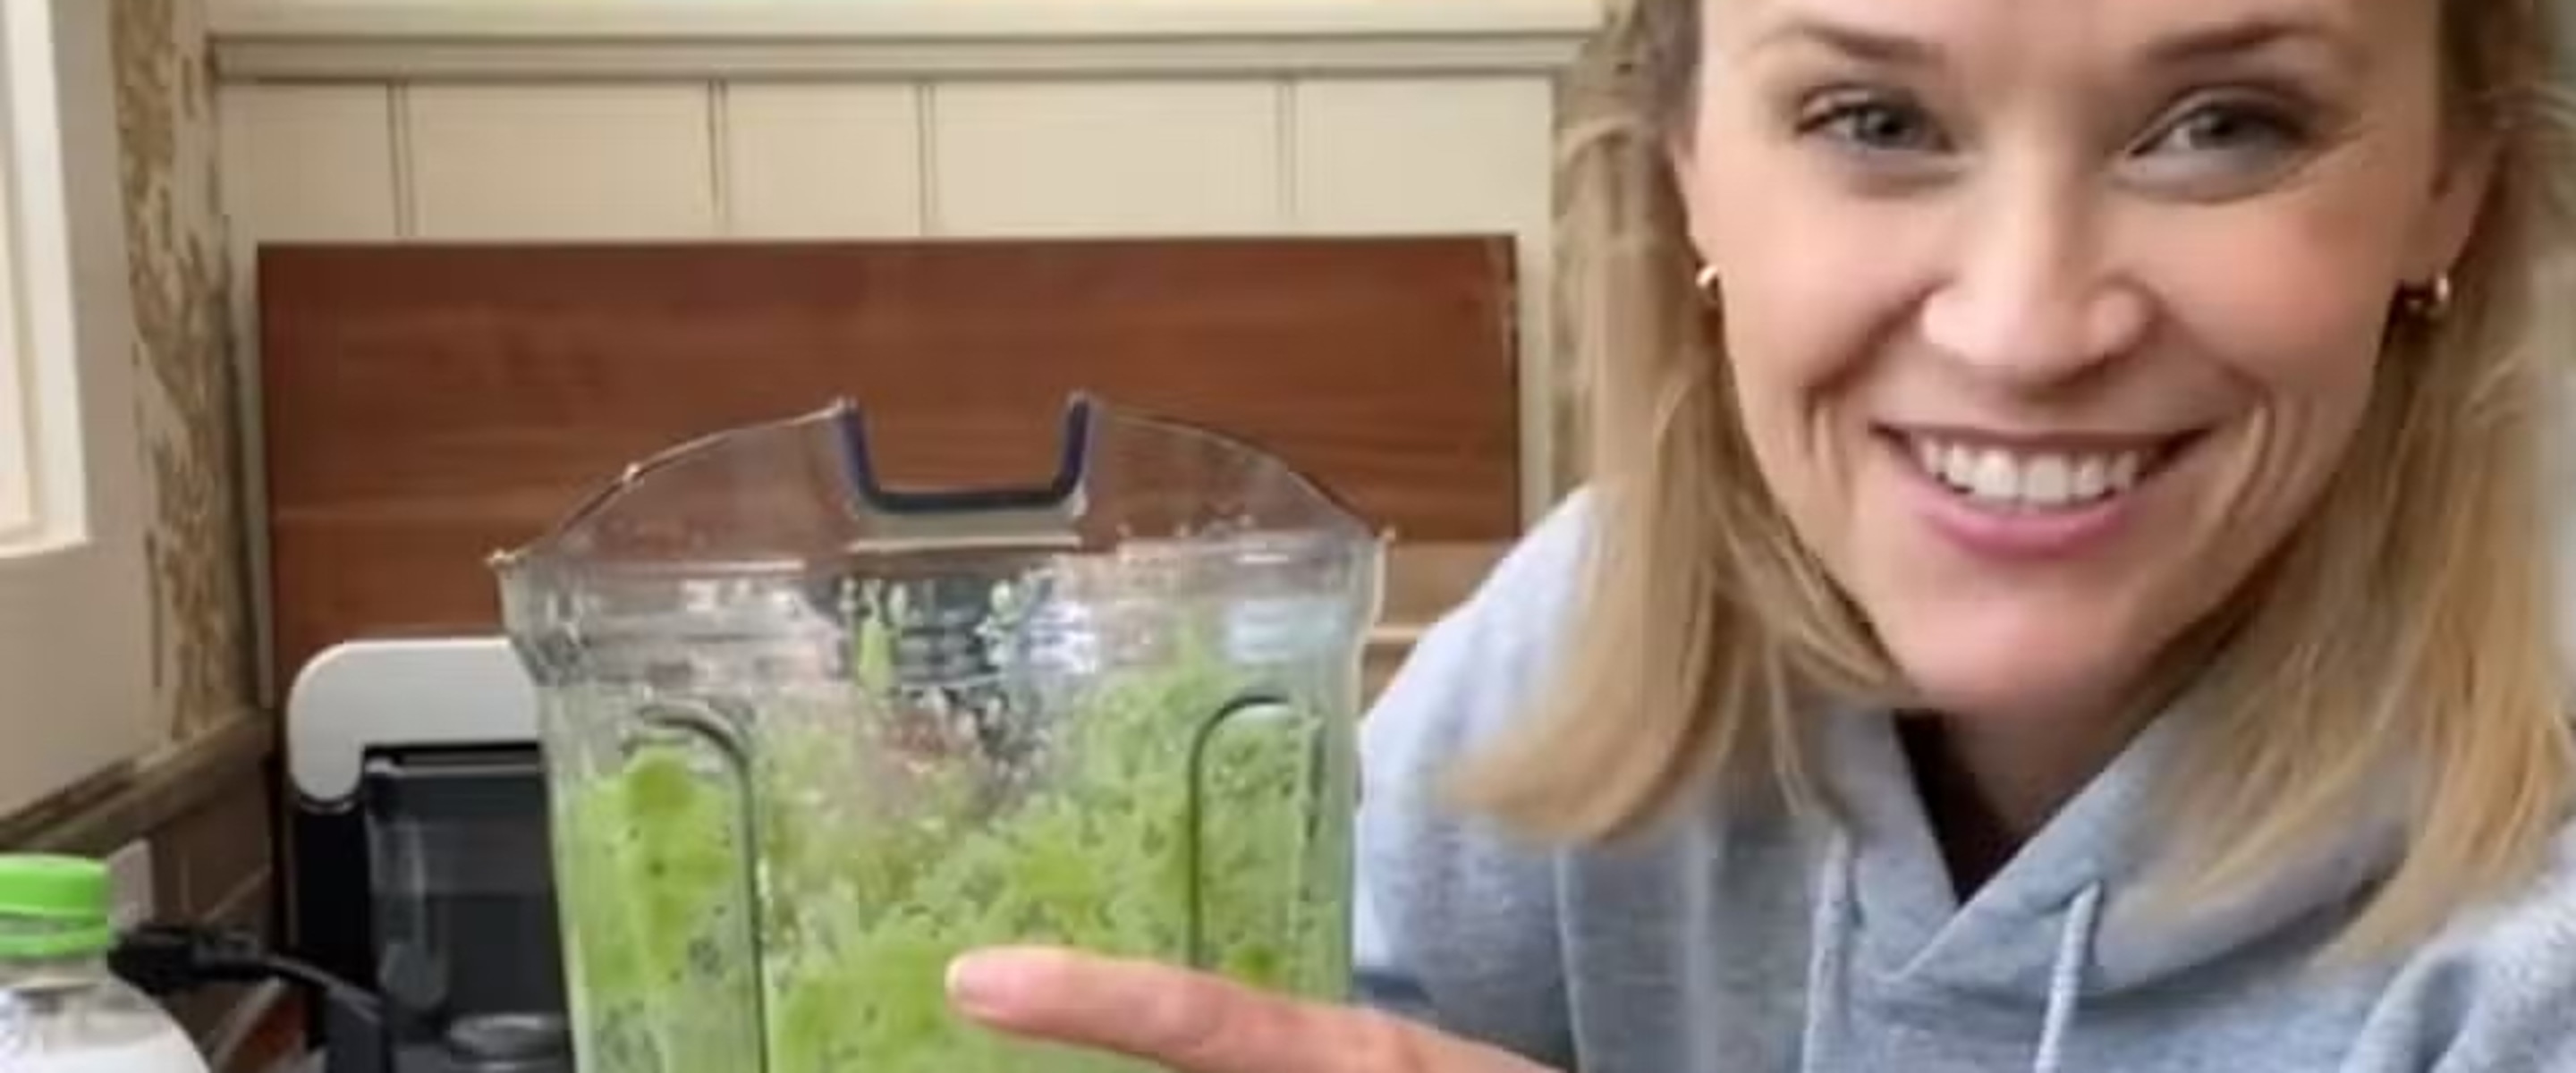 Reese Witherspoon Says It Makes Her Glow, But What Can a Green Juice Really Do for Your Health?